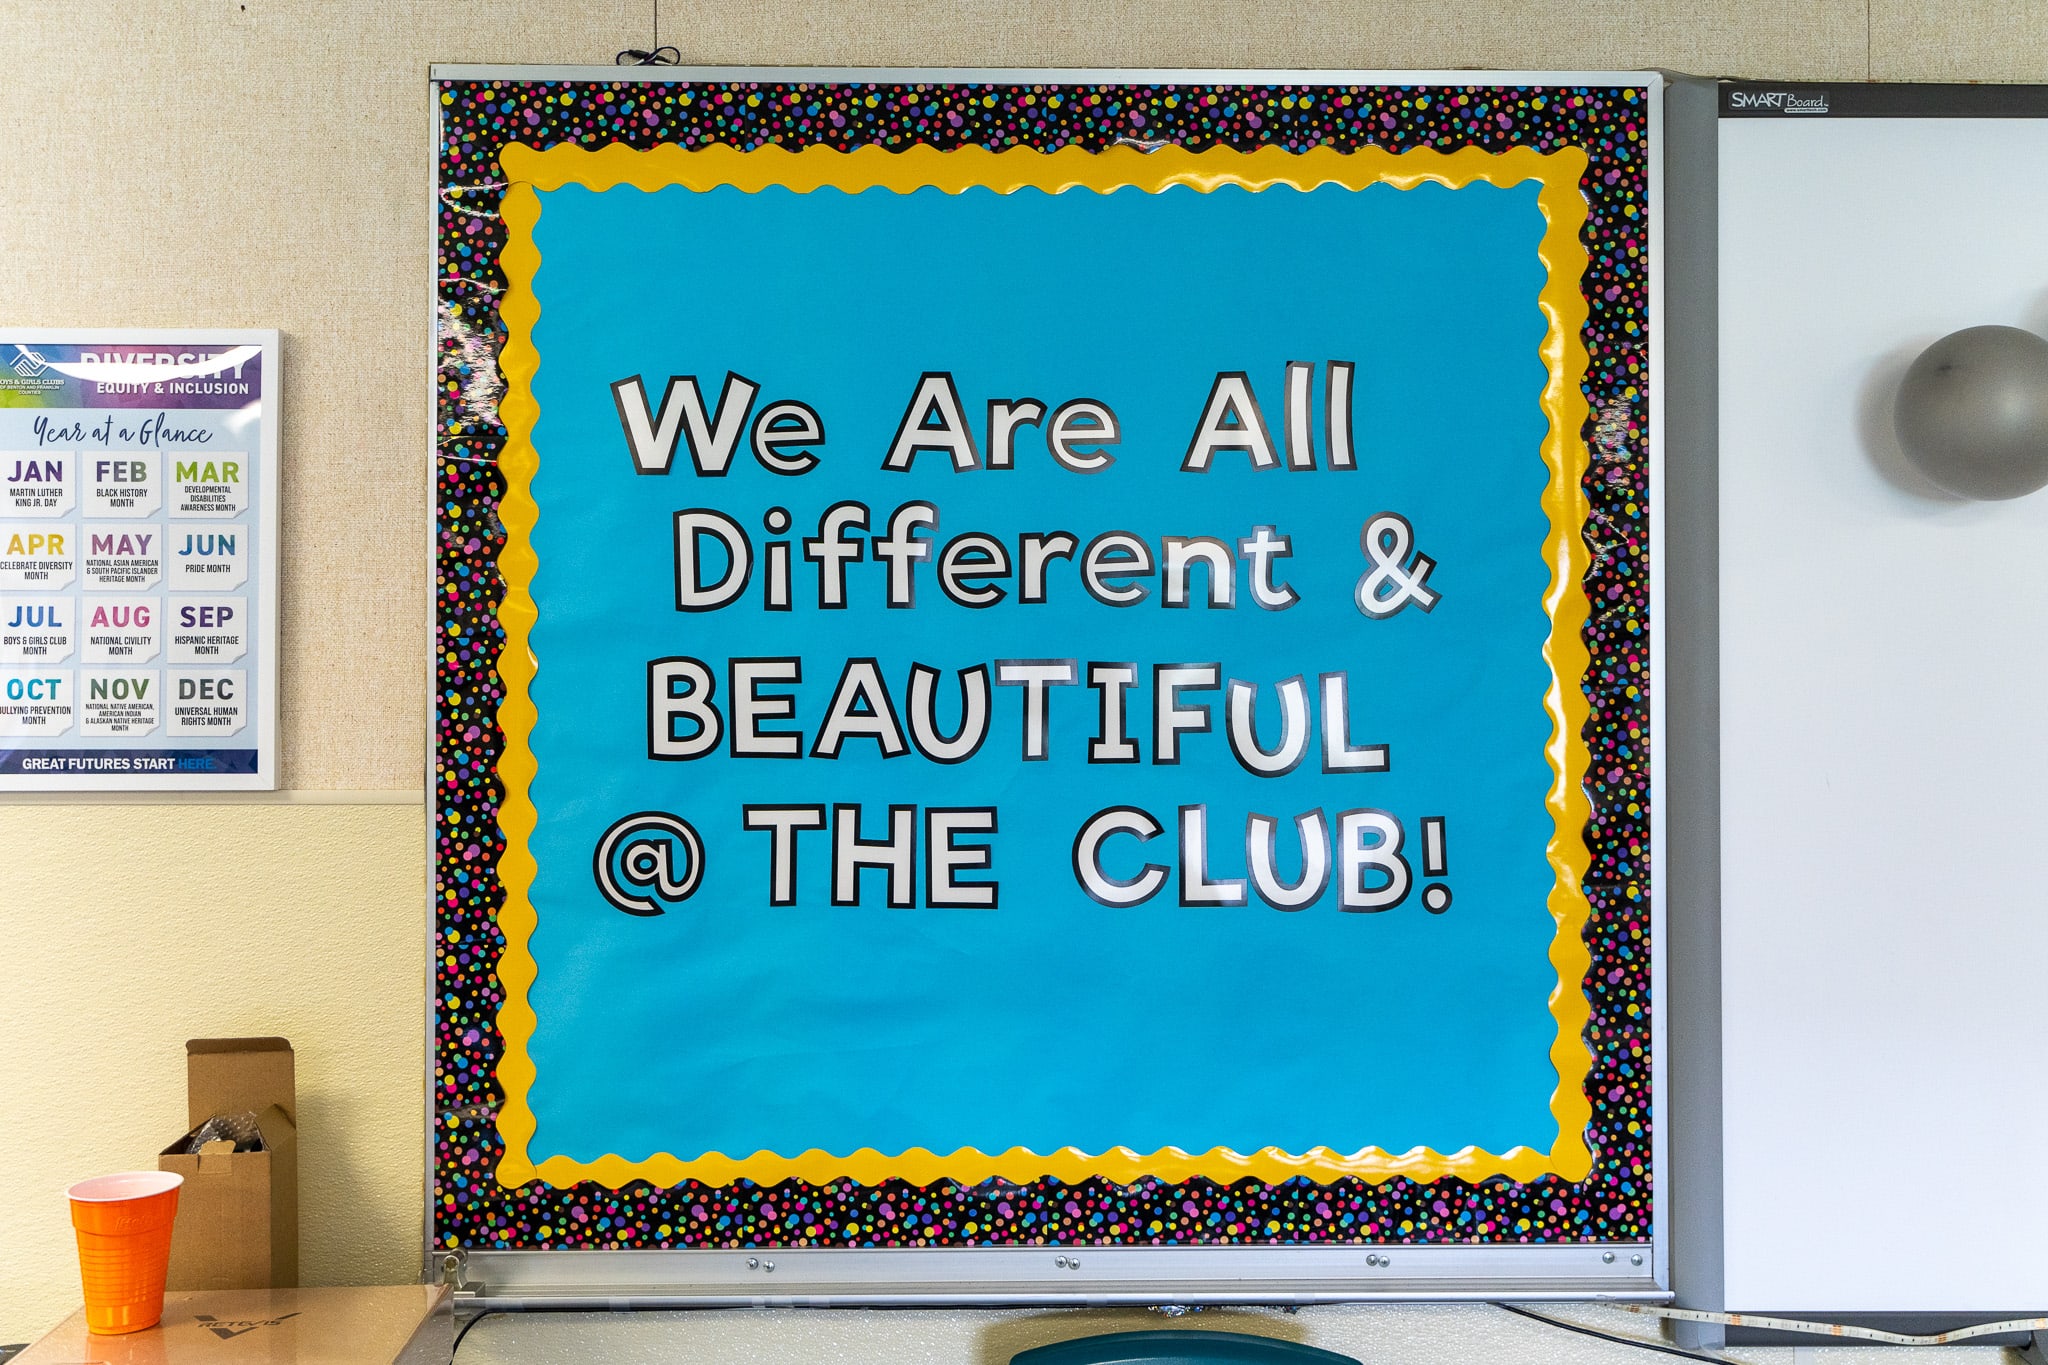 We Are All Different & Beautiful @ The Club! Sign